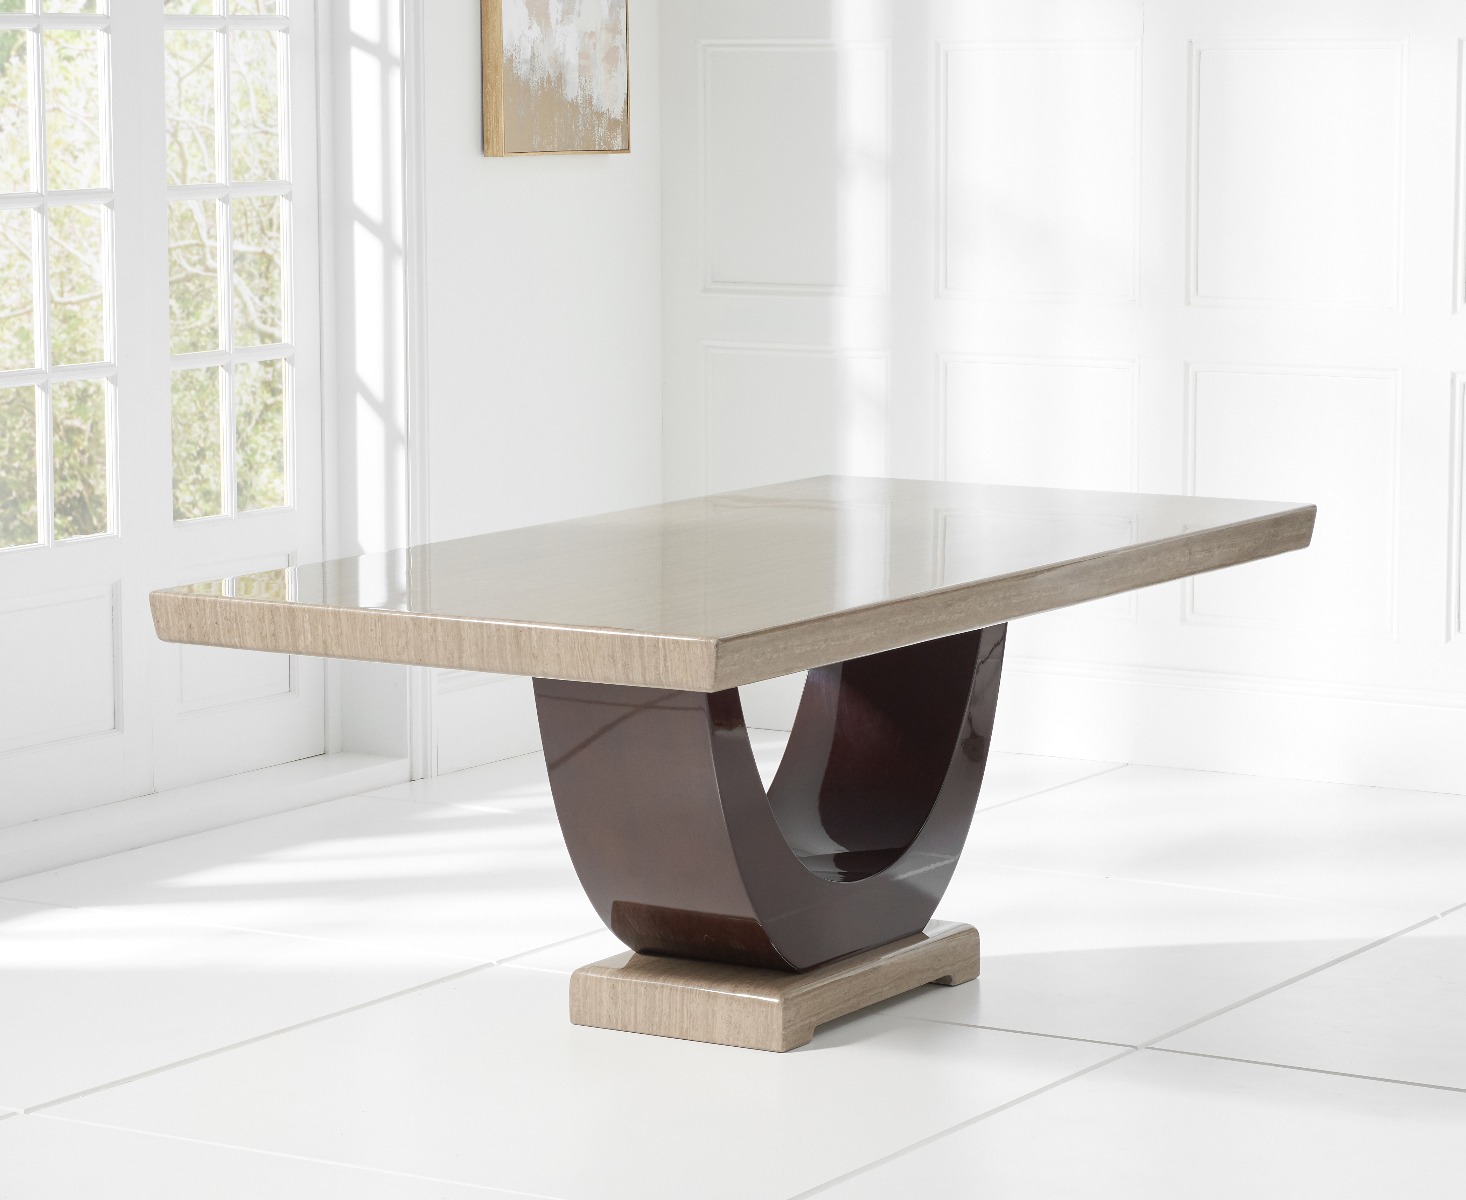 Photo 4 of Novara 170cm brown pedestal marble dining table with 6 grey francesca chairs